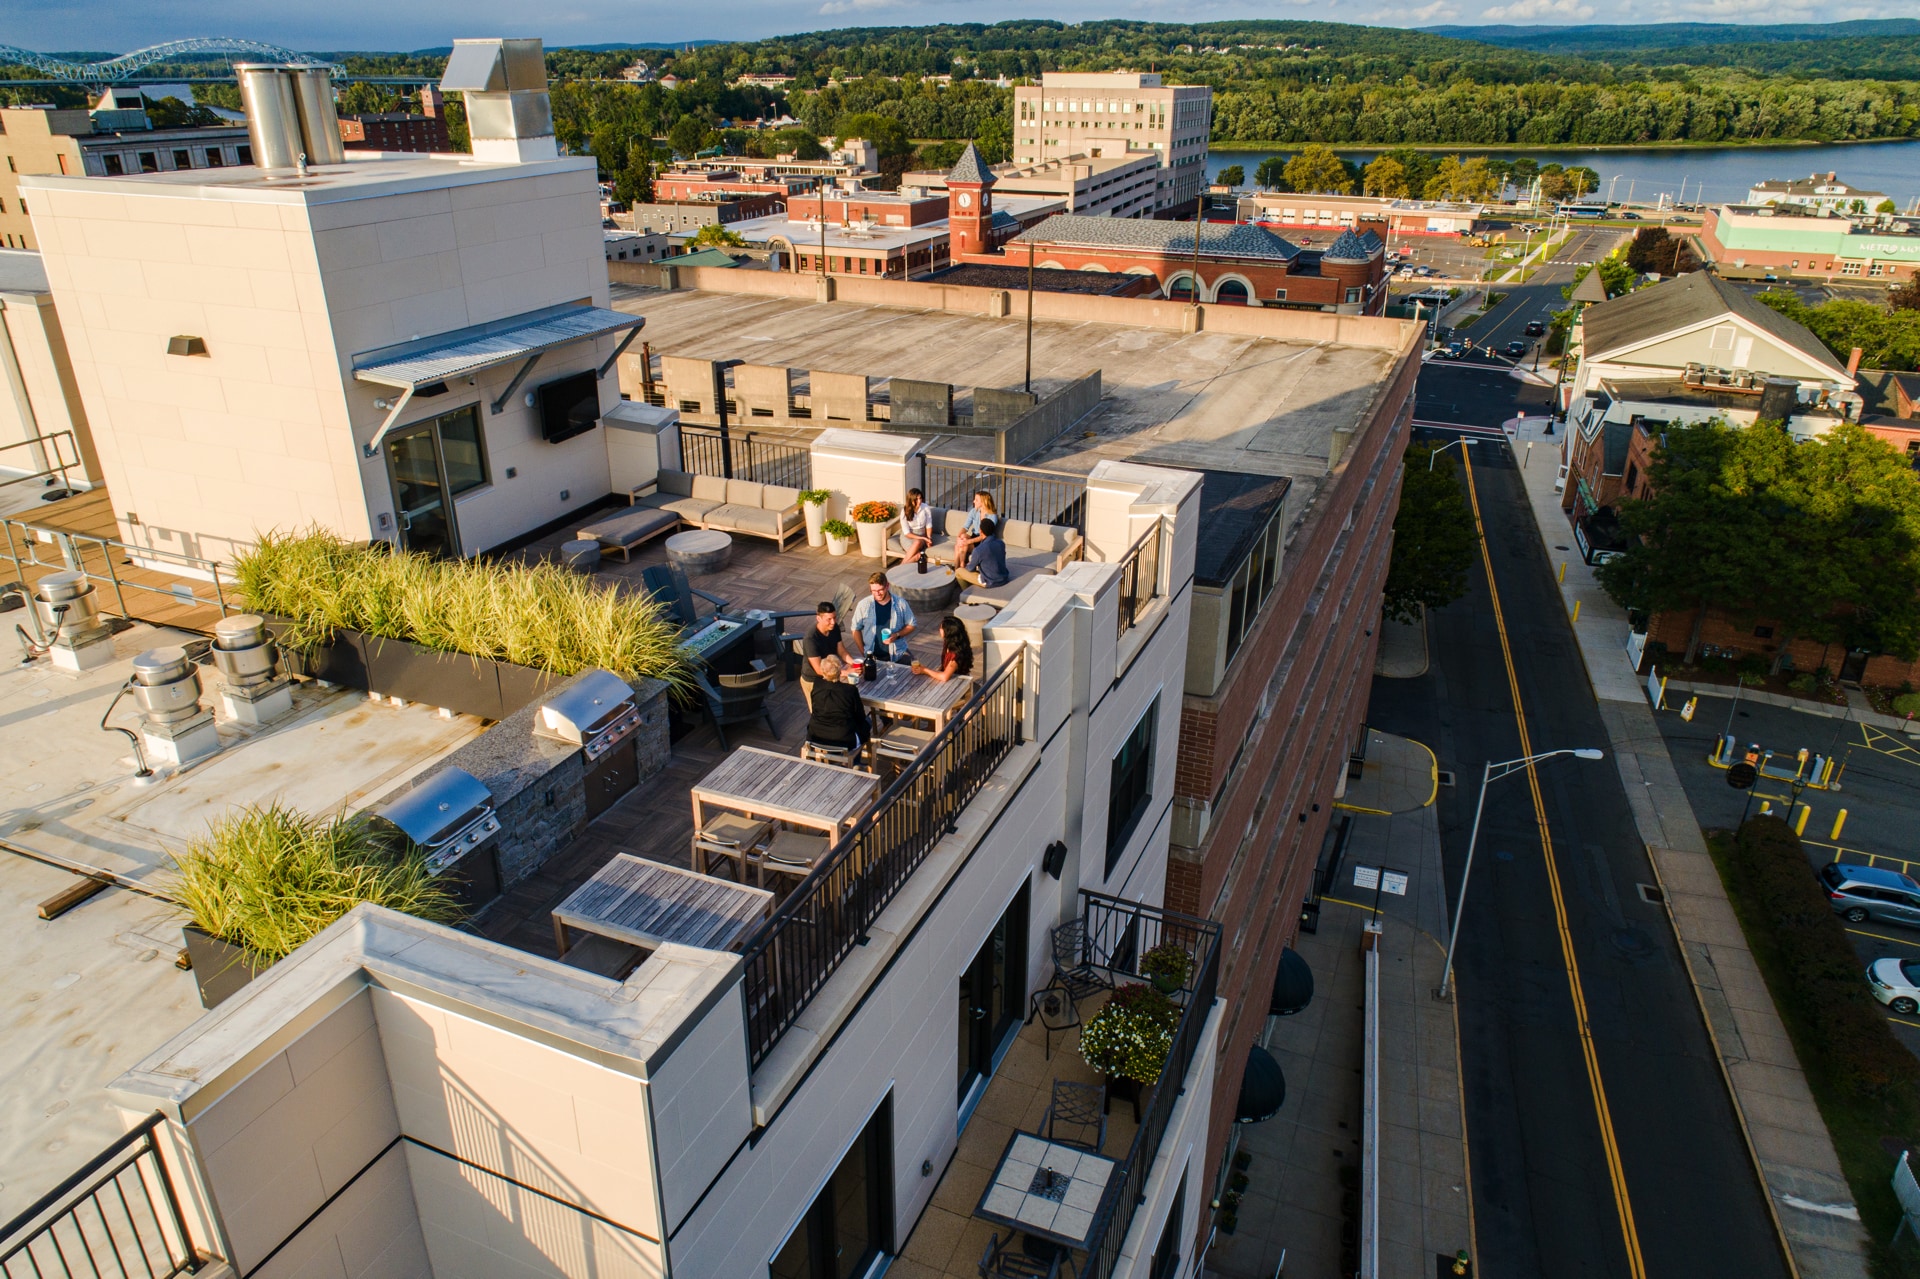 Rooftop deck overlooking downtown Middletown and the Connecticut River